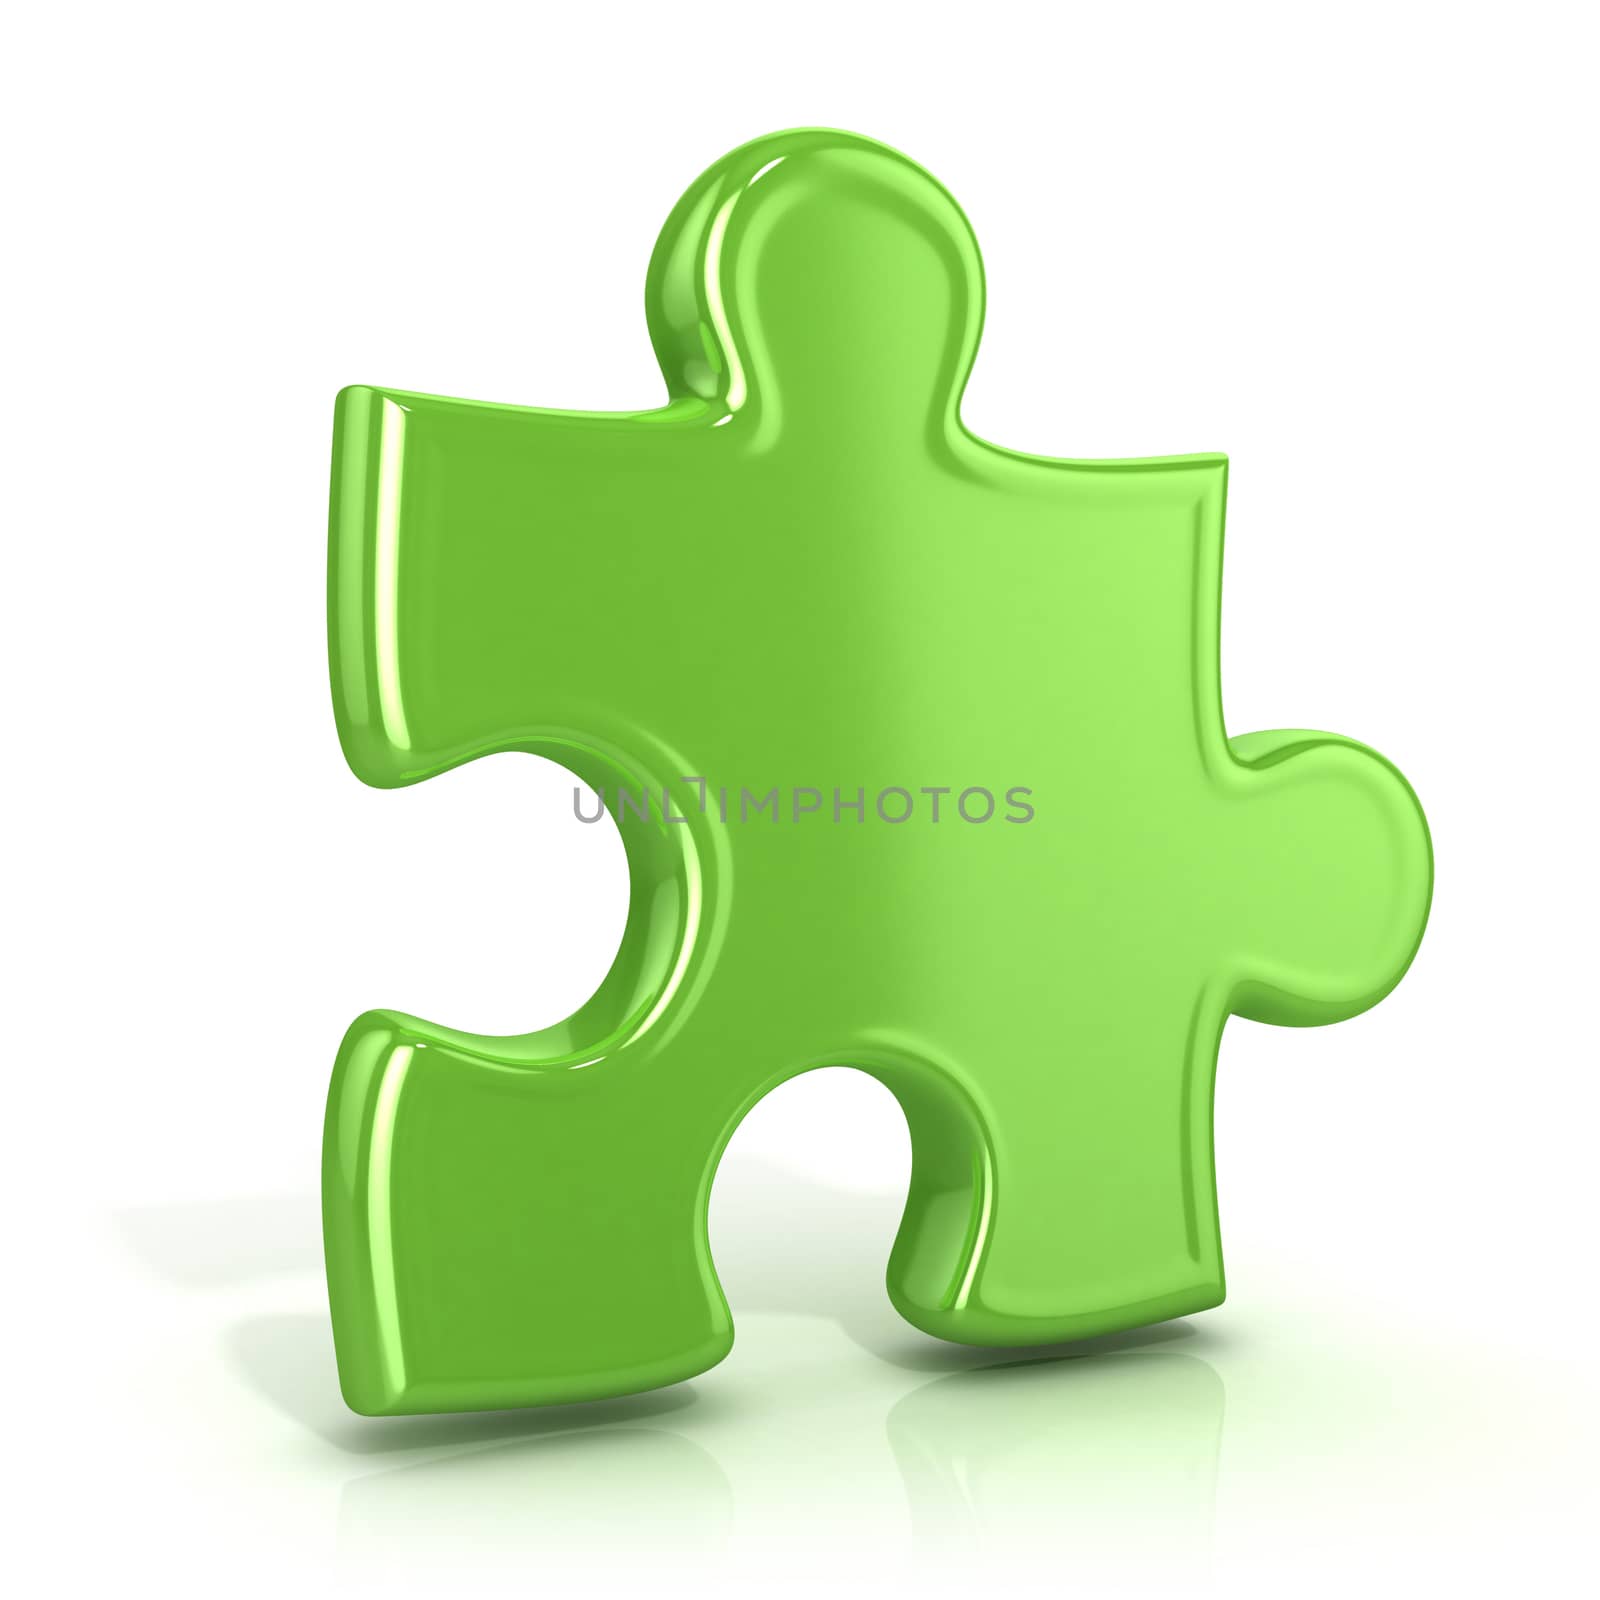 Single, green, standing jigsaw puzzle piece. 3D render icon isolated on white background. Usual angle